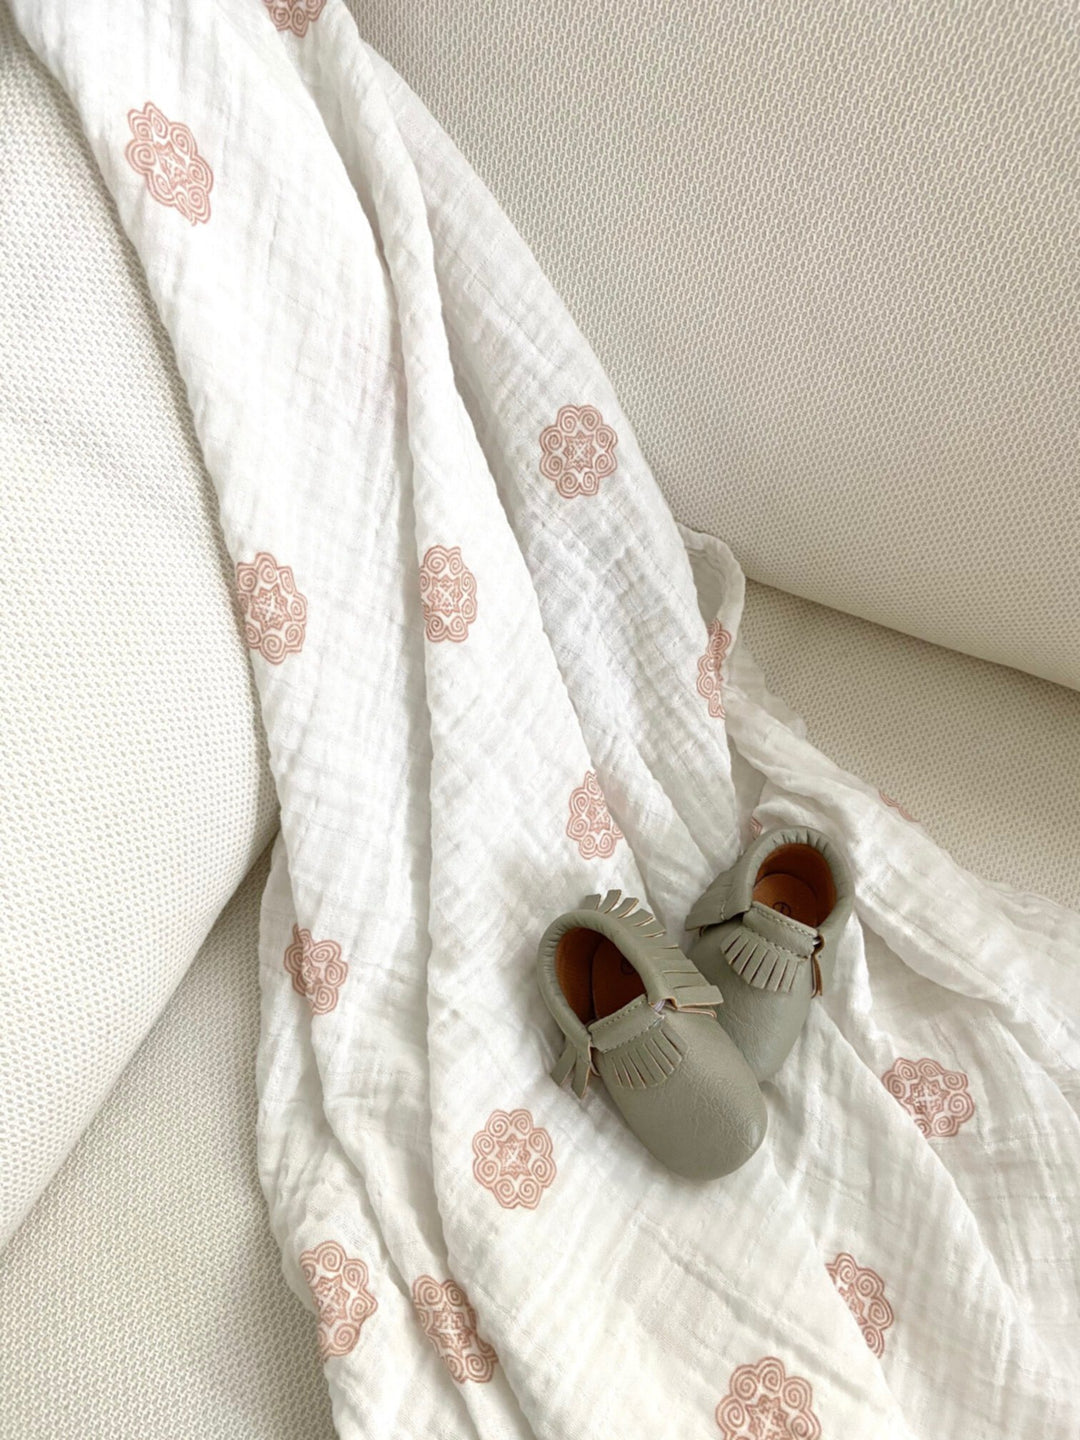 Shop our baby muslin swaddles for a great blanket for your baby.